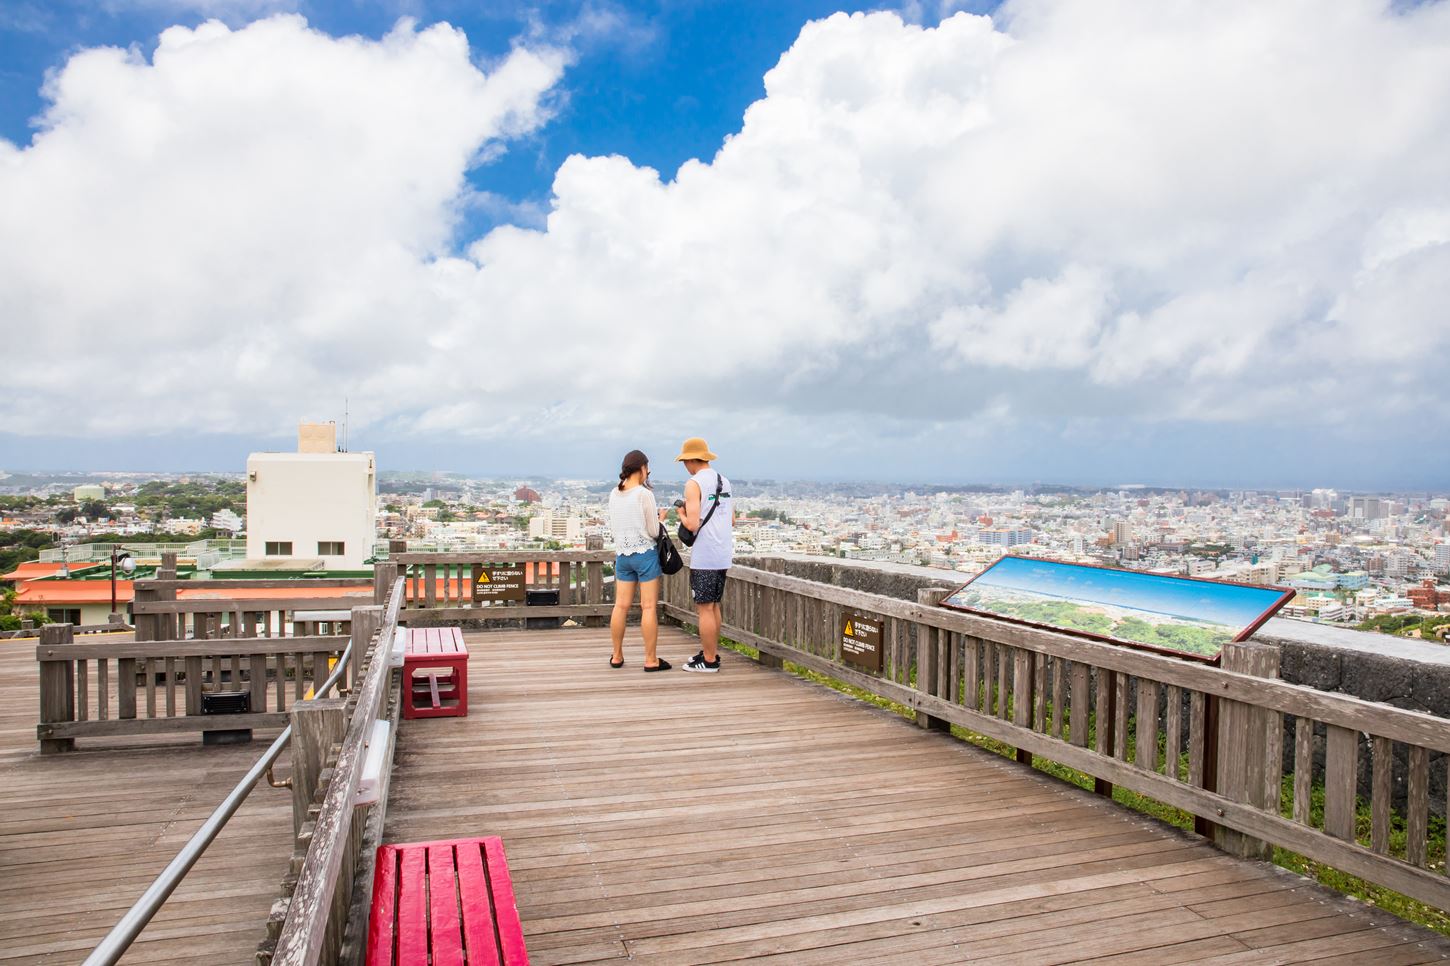 Sightseeing scenery that simply shows the weather and clothes in Okinawa in August4